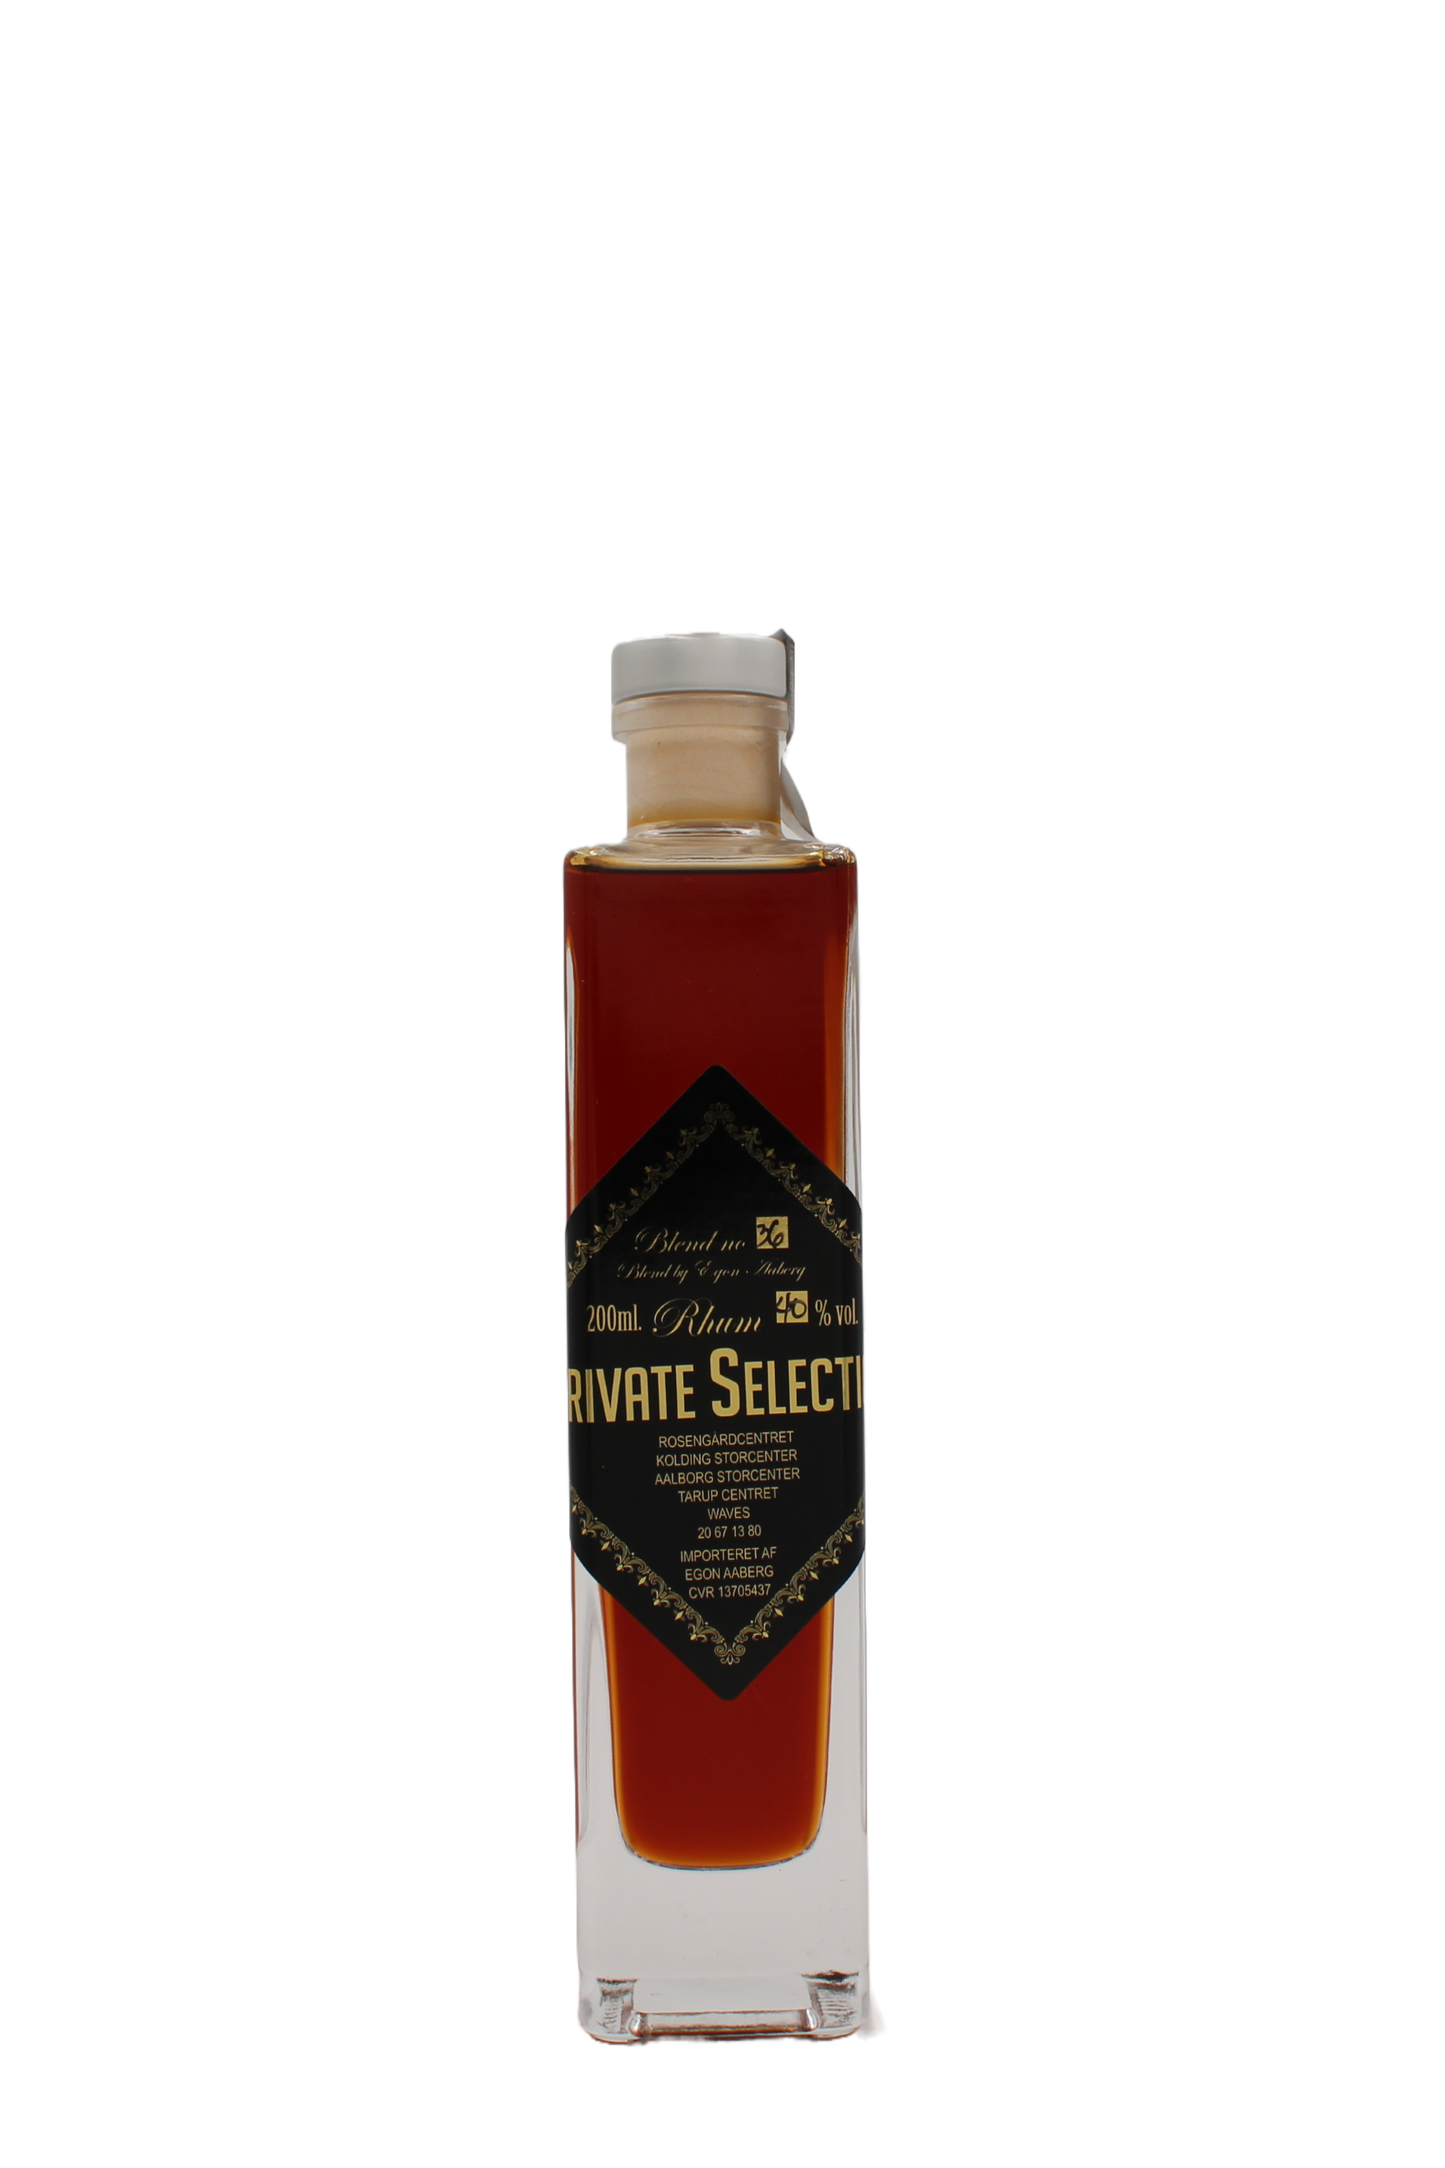 Private Selection - Blend no. 36 200ml